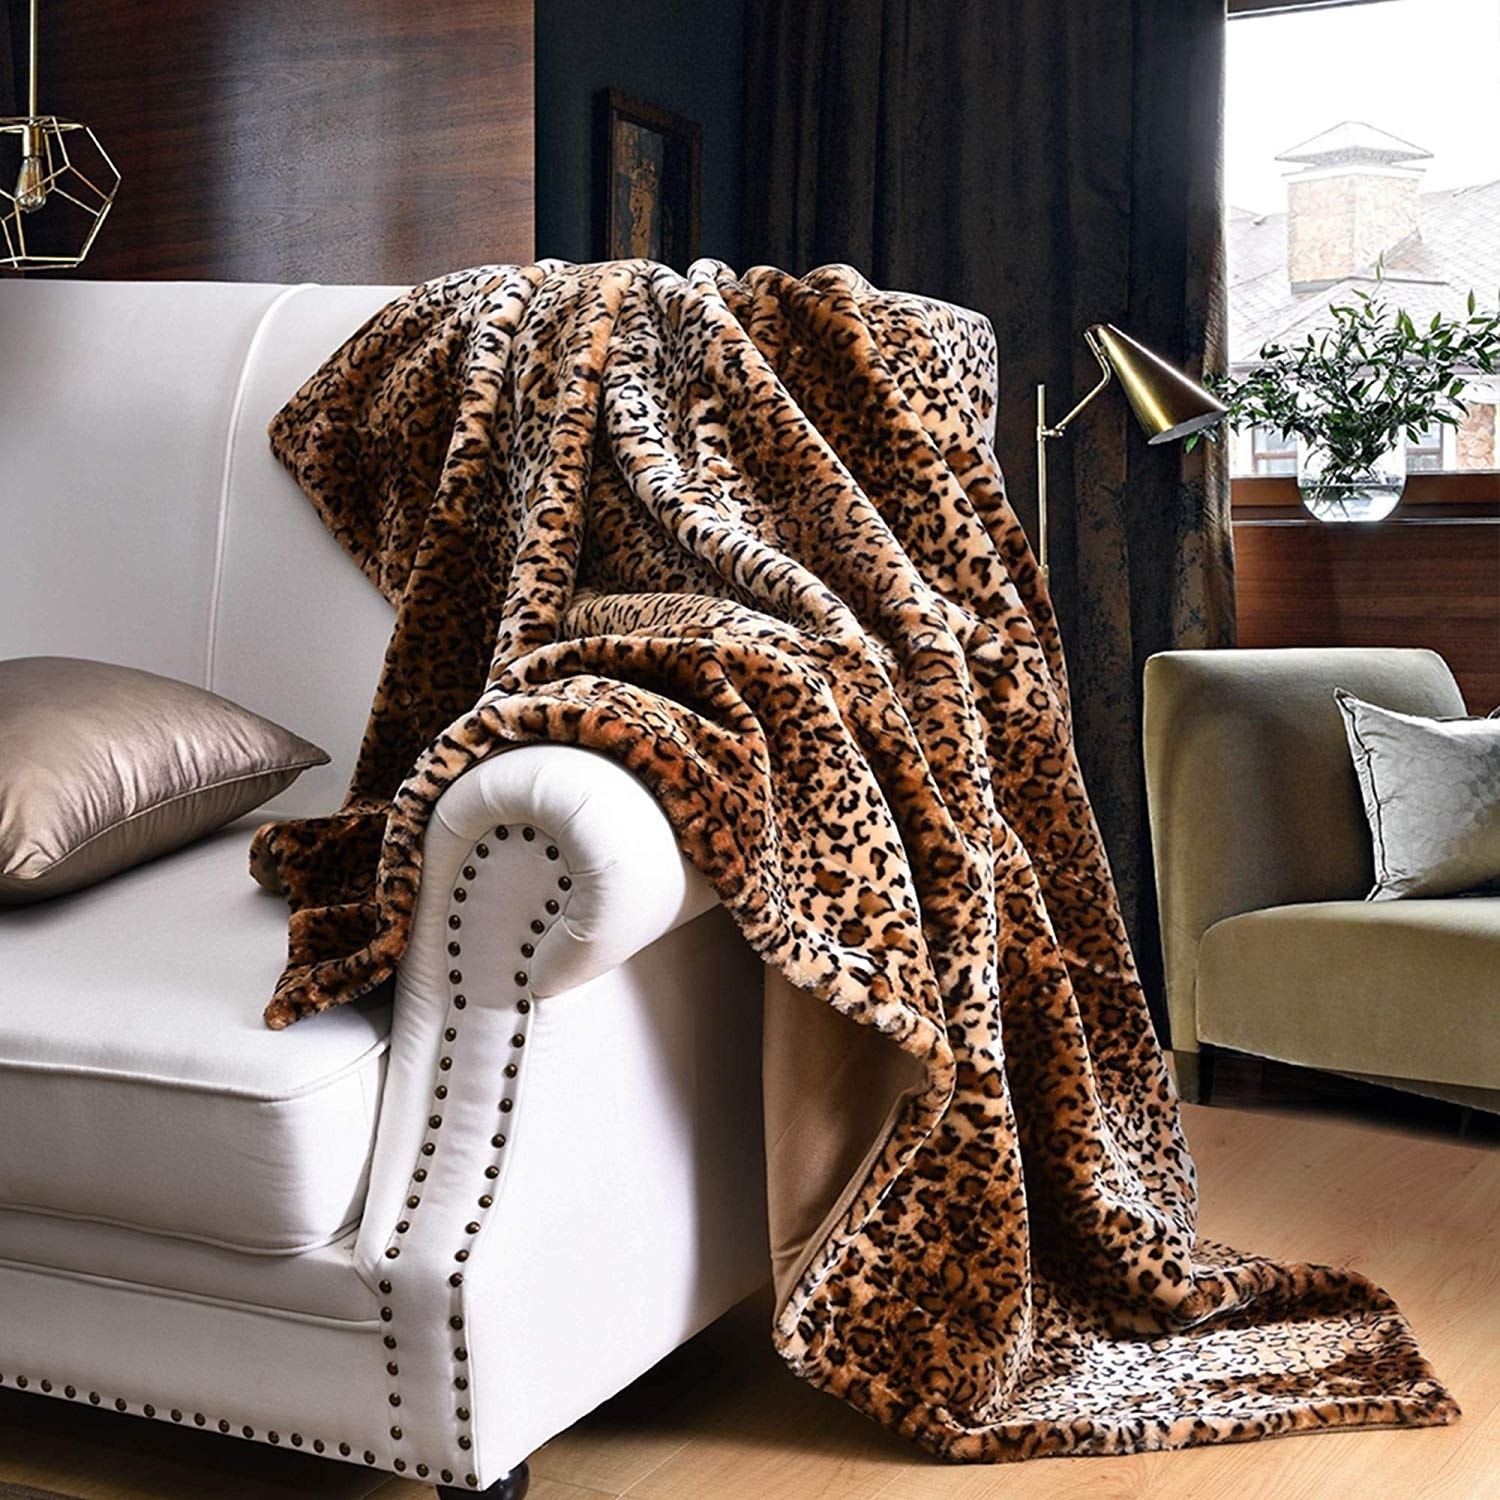 Silver Orchid Quirk Faux Fur Leopard Throw Blanket - Overstock - 28332965